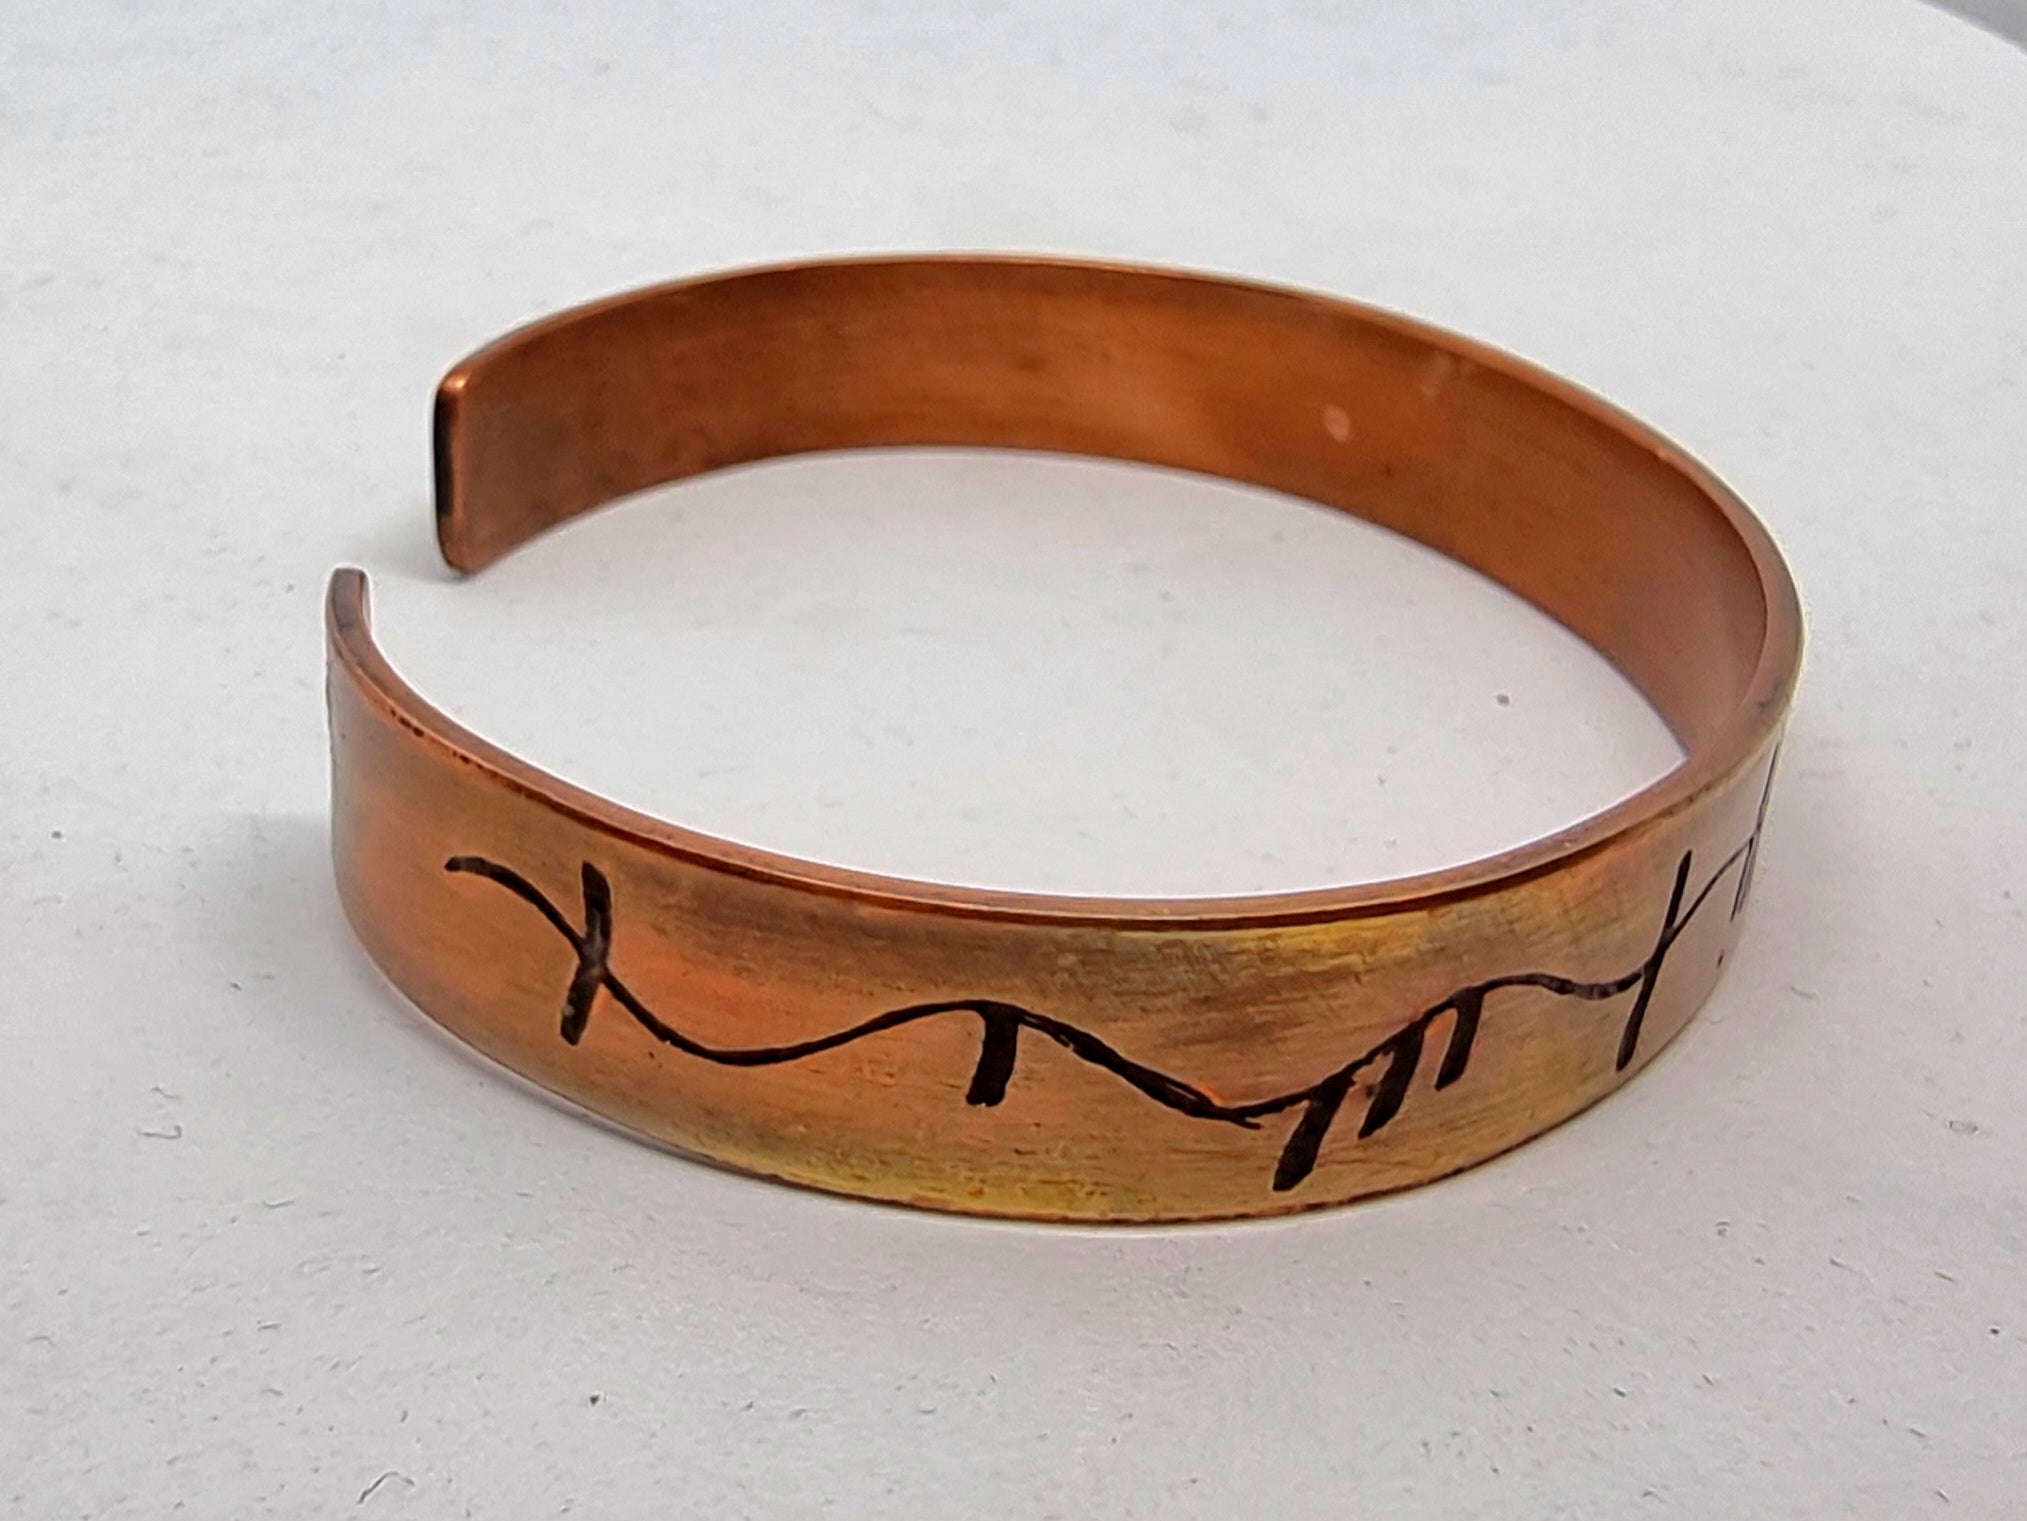 Uisce Beatha (Water of Life) Whisky Lovers Celtic Ogham Druid Cuff Bracelet in copper (St Patrick's Day) Irish & Scottish Heritage